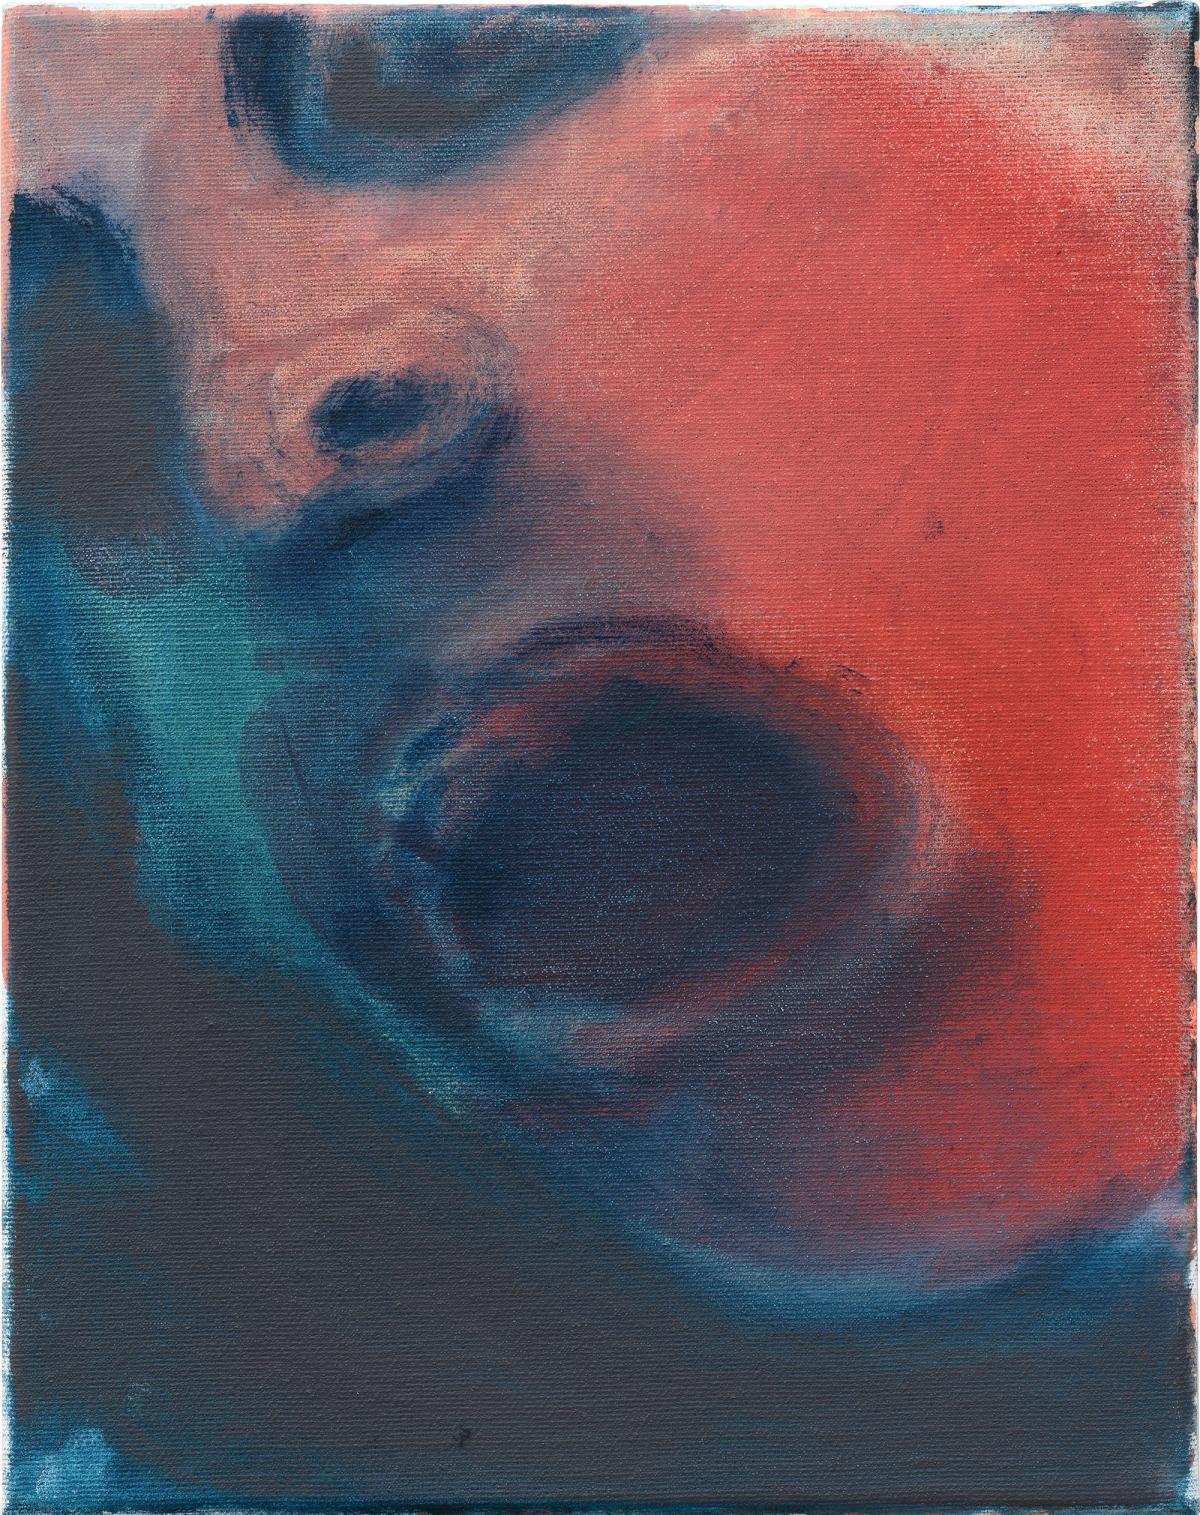 Marlene Dumas's Mouth (2018-2021). Courtesy of Sotheby's and the artist